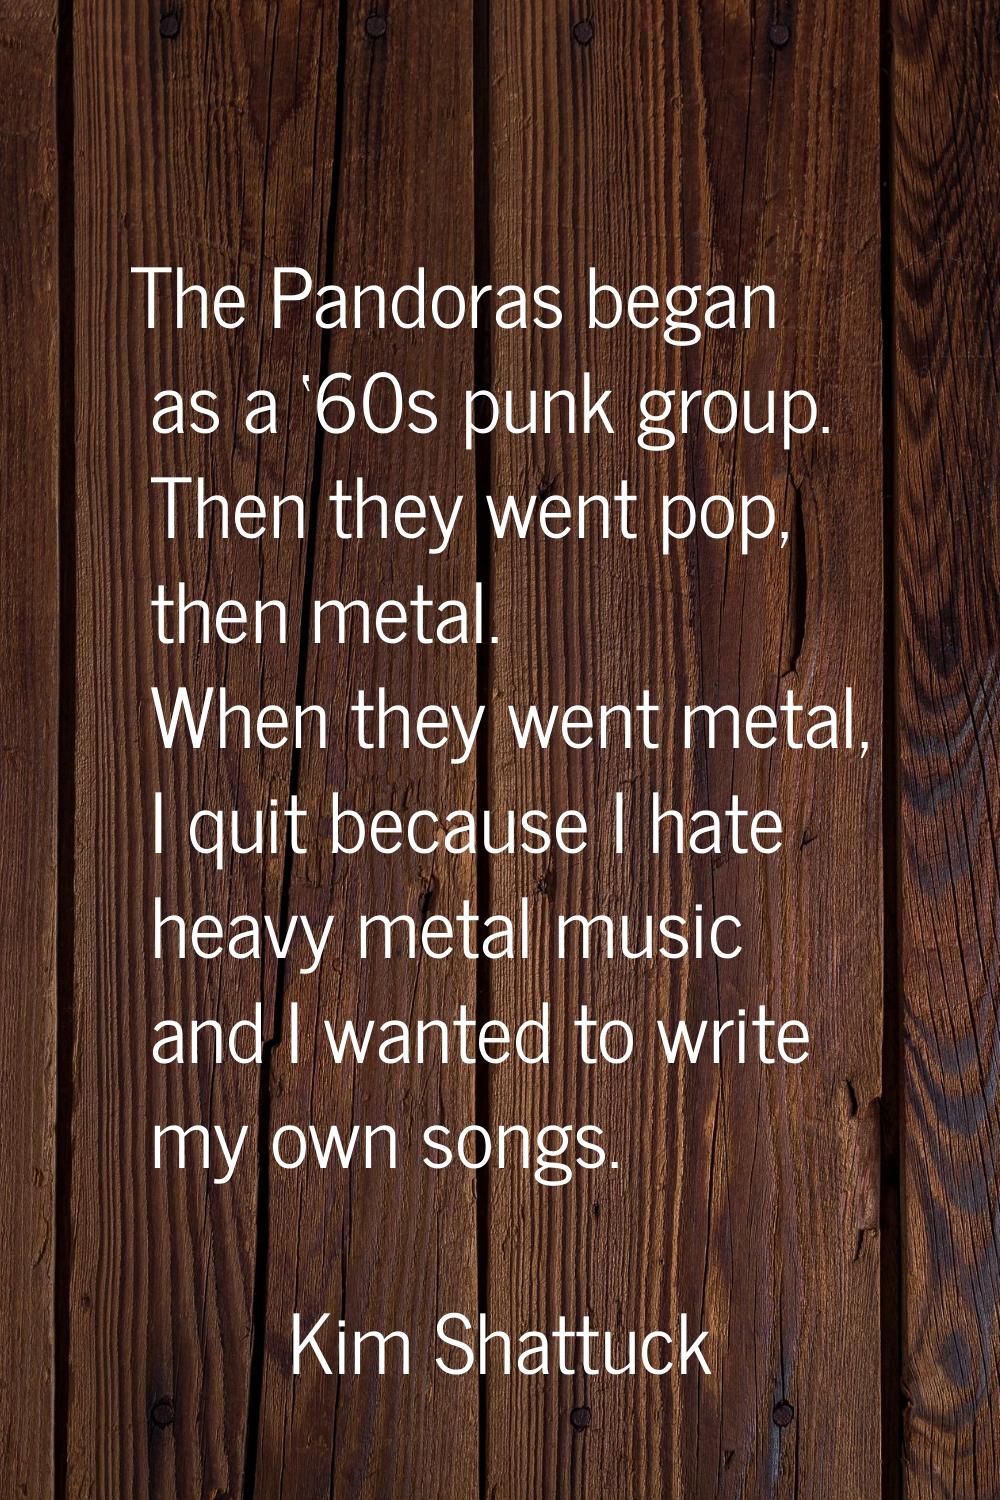 The Pandoras began as a ‘60s punk group. Then they went pop, then metal. When they went metal, I qu